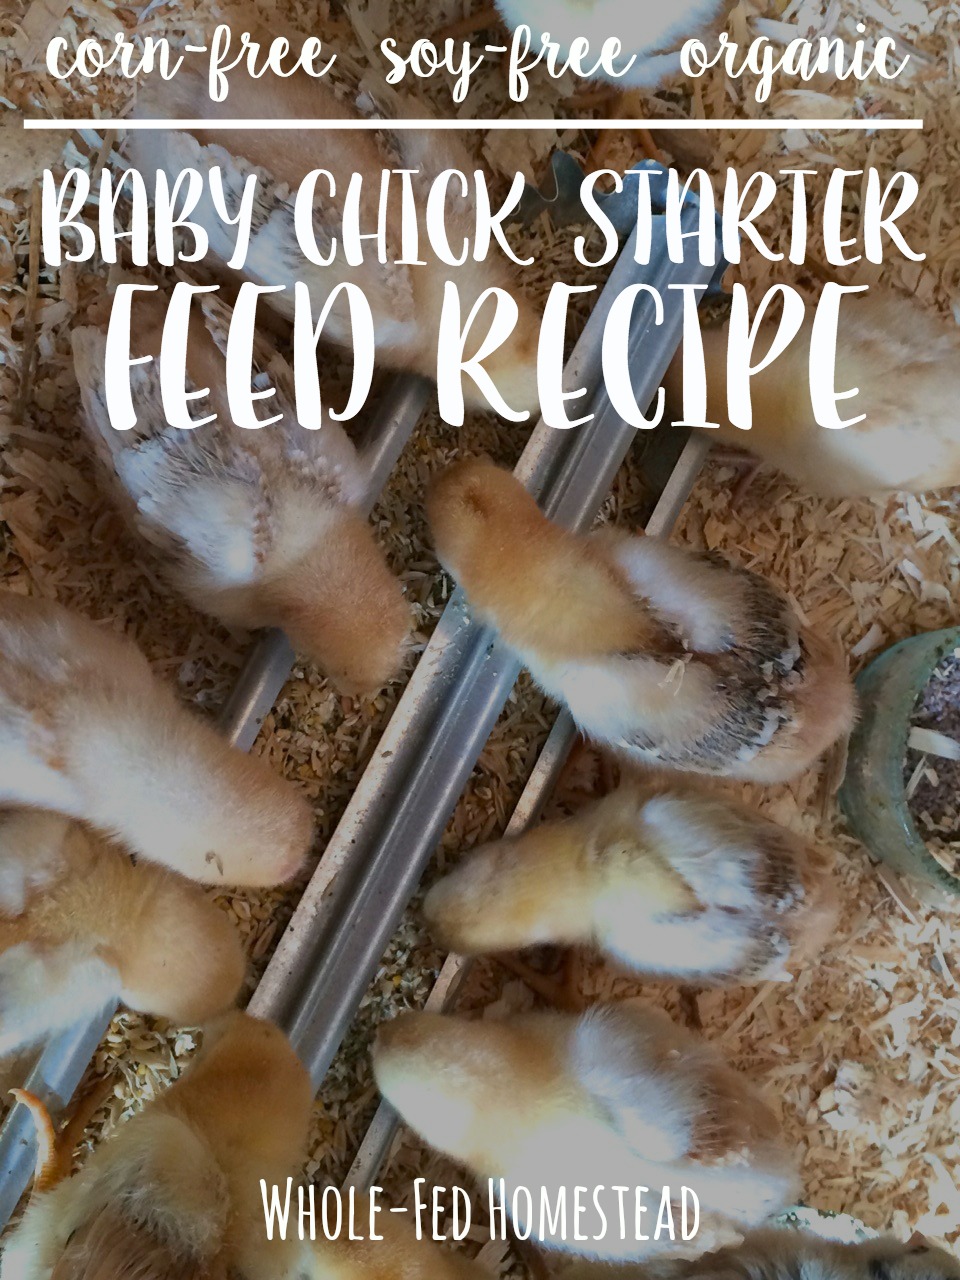 Homemade Organic Baby Chick Starter Feed Recipe {corn-free and soy-free}